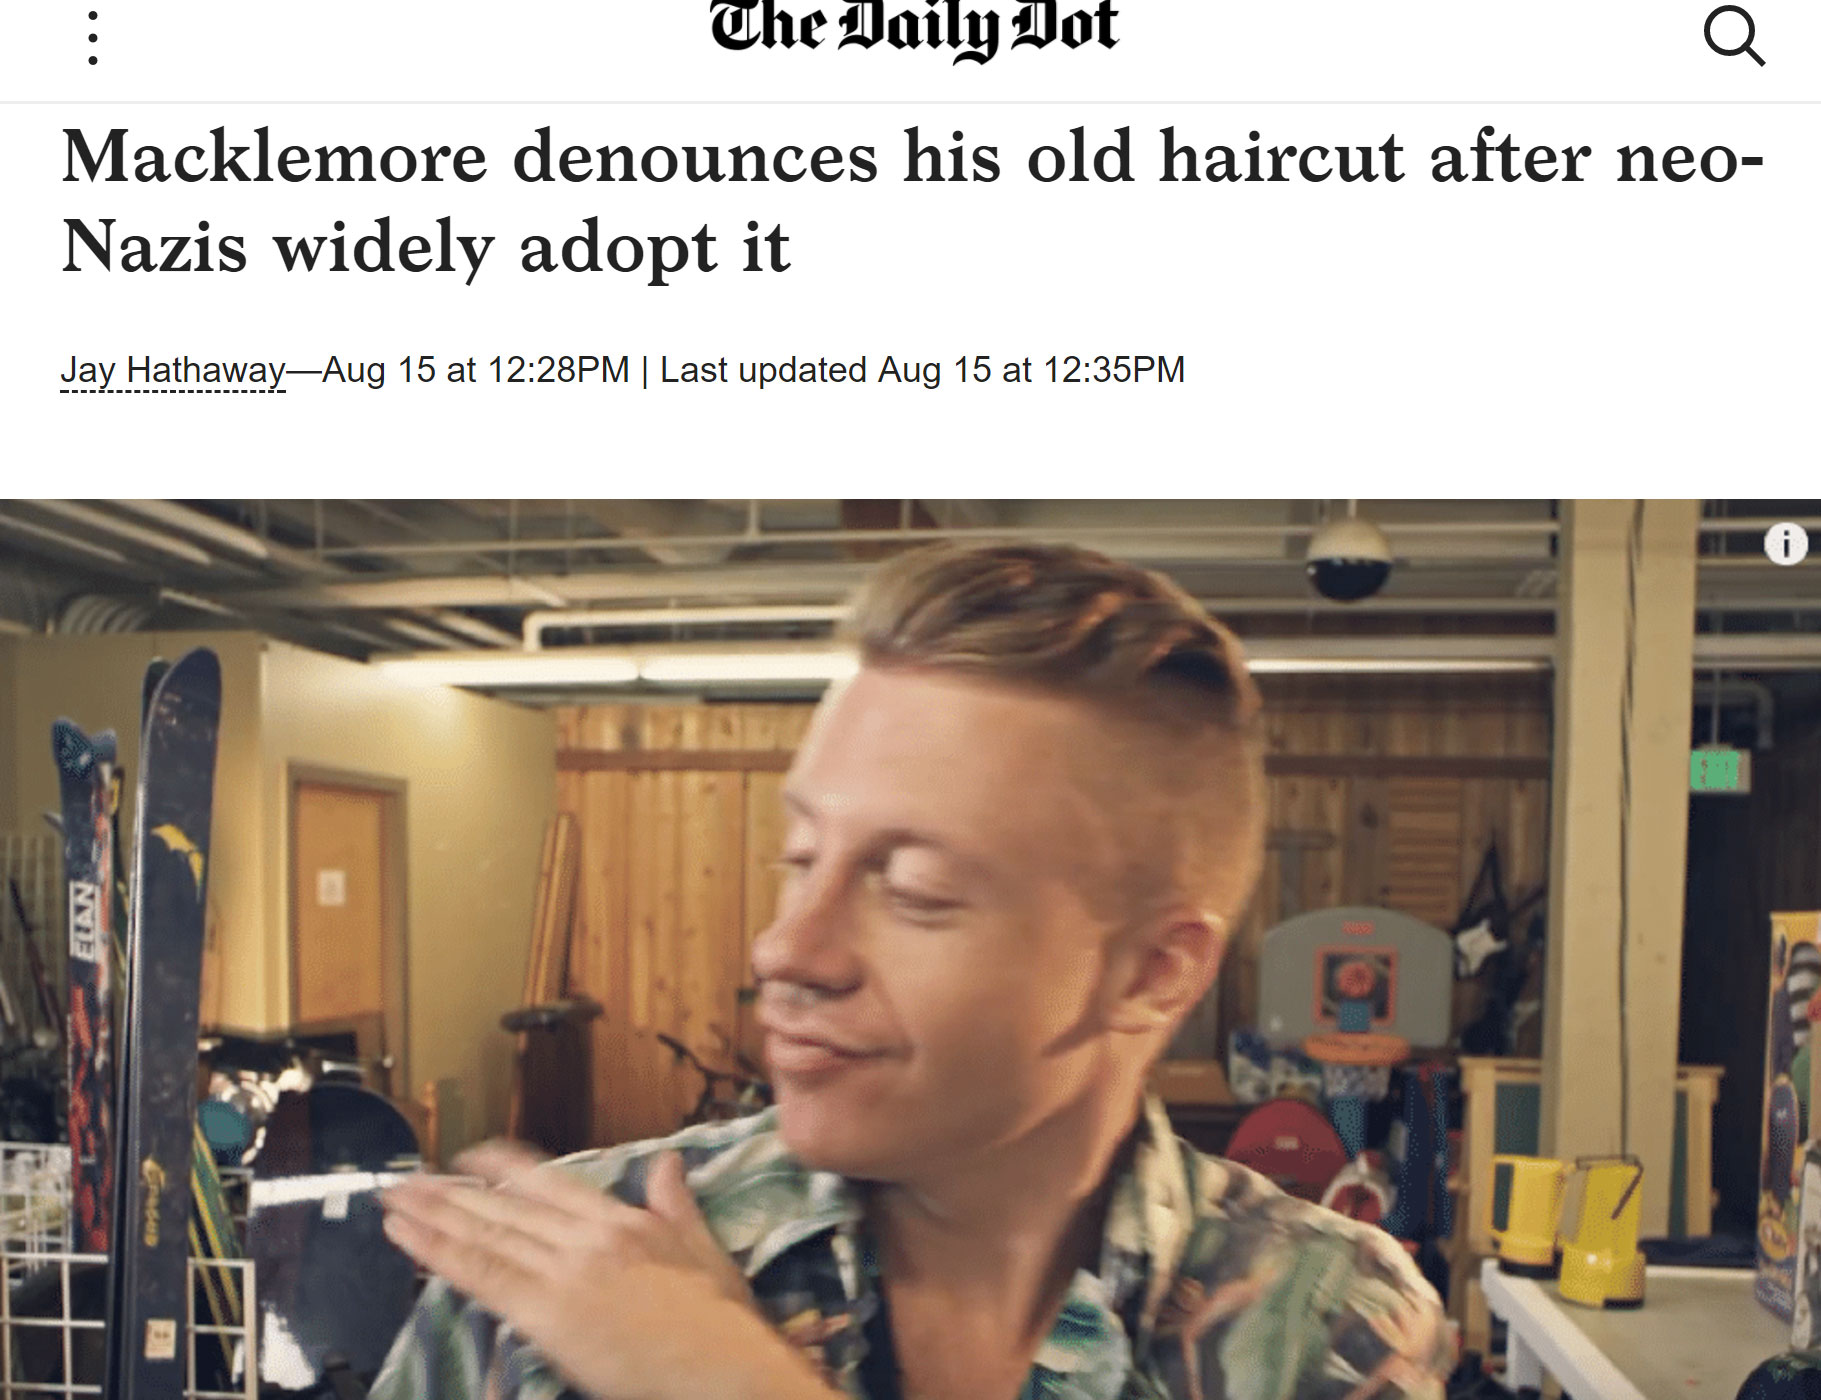 3-Macklemore-denounces-his-old-haircut-after-neo-nazis-widely-adopt-it.jpg